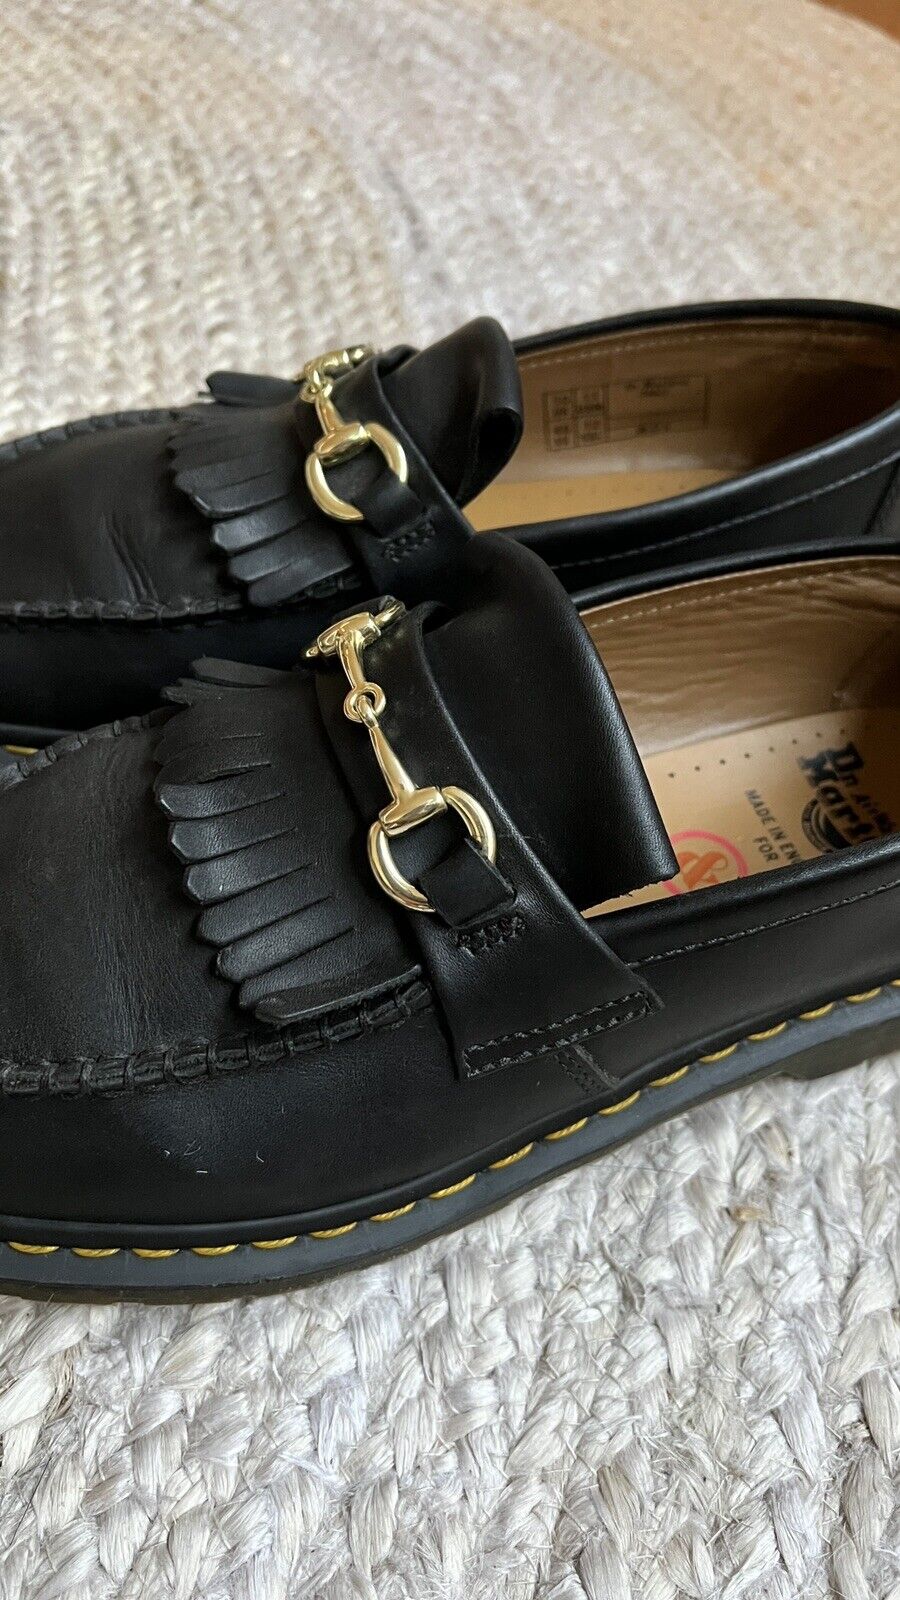 Dr. Martens X United Arrows Loafers | eBay